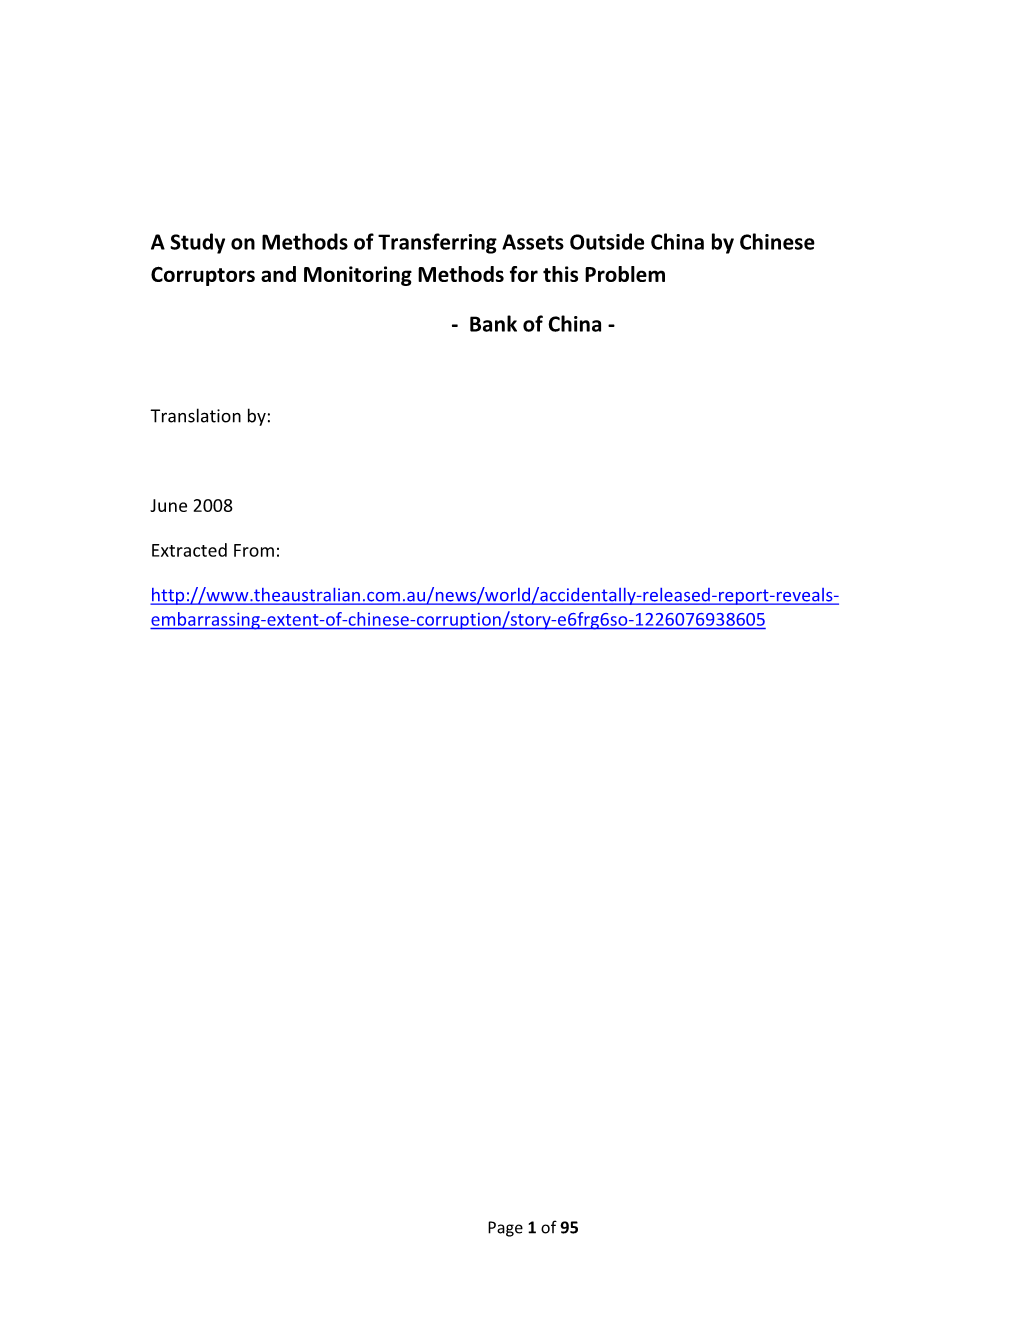 A Study on Methods of Transferring Assets Outside China by Chinese Corruptors and Monitoring Methods for This Problem